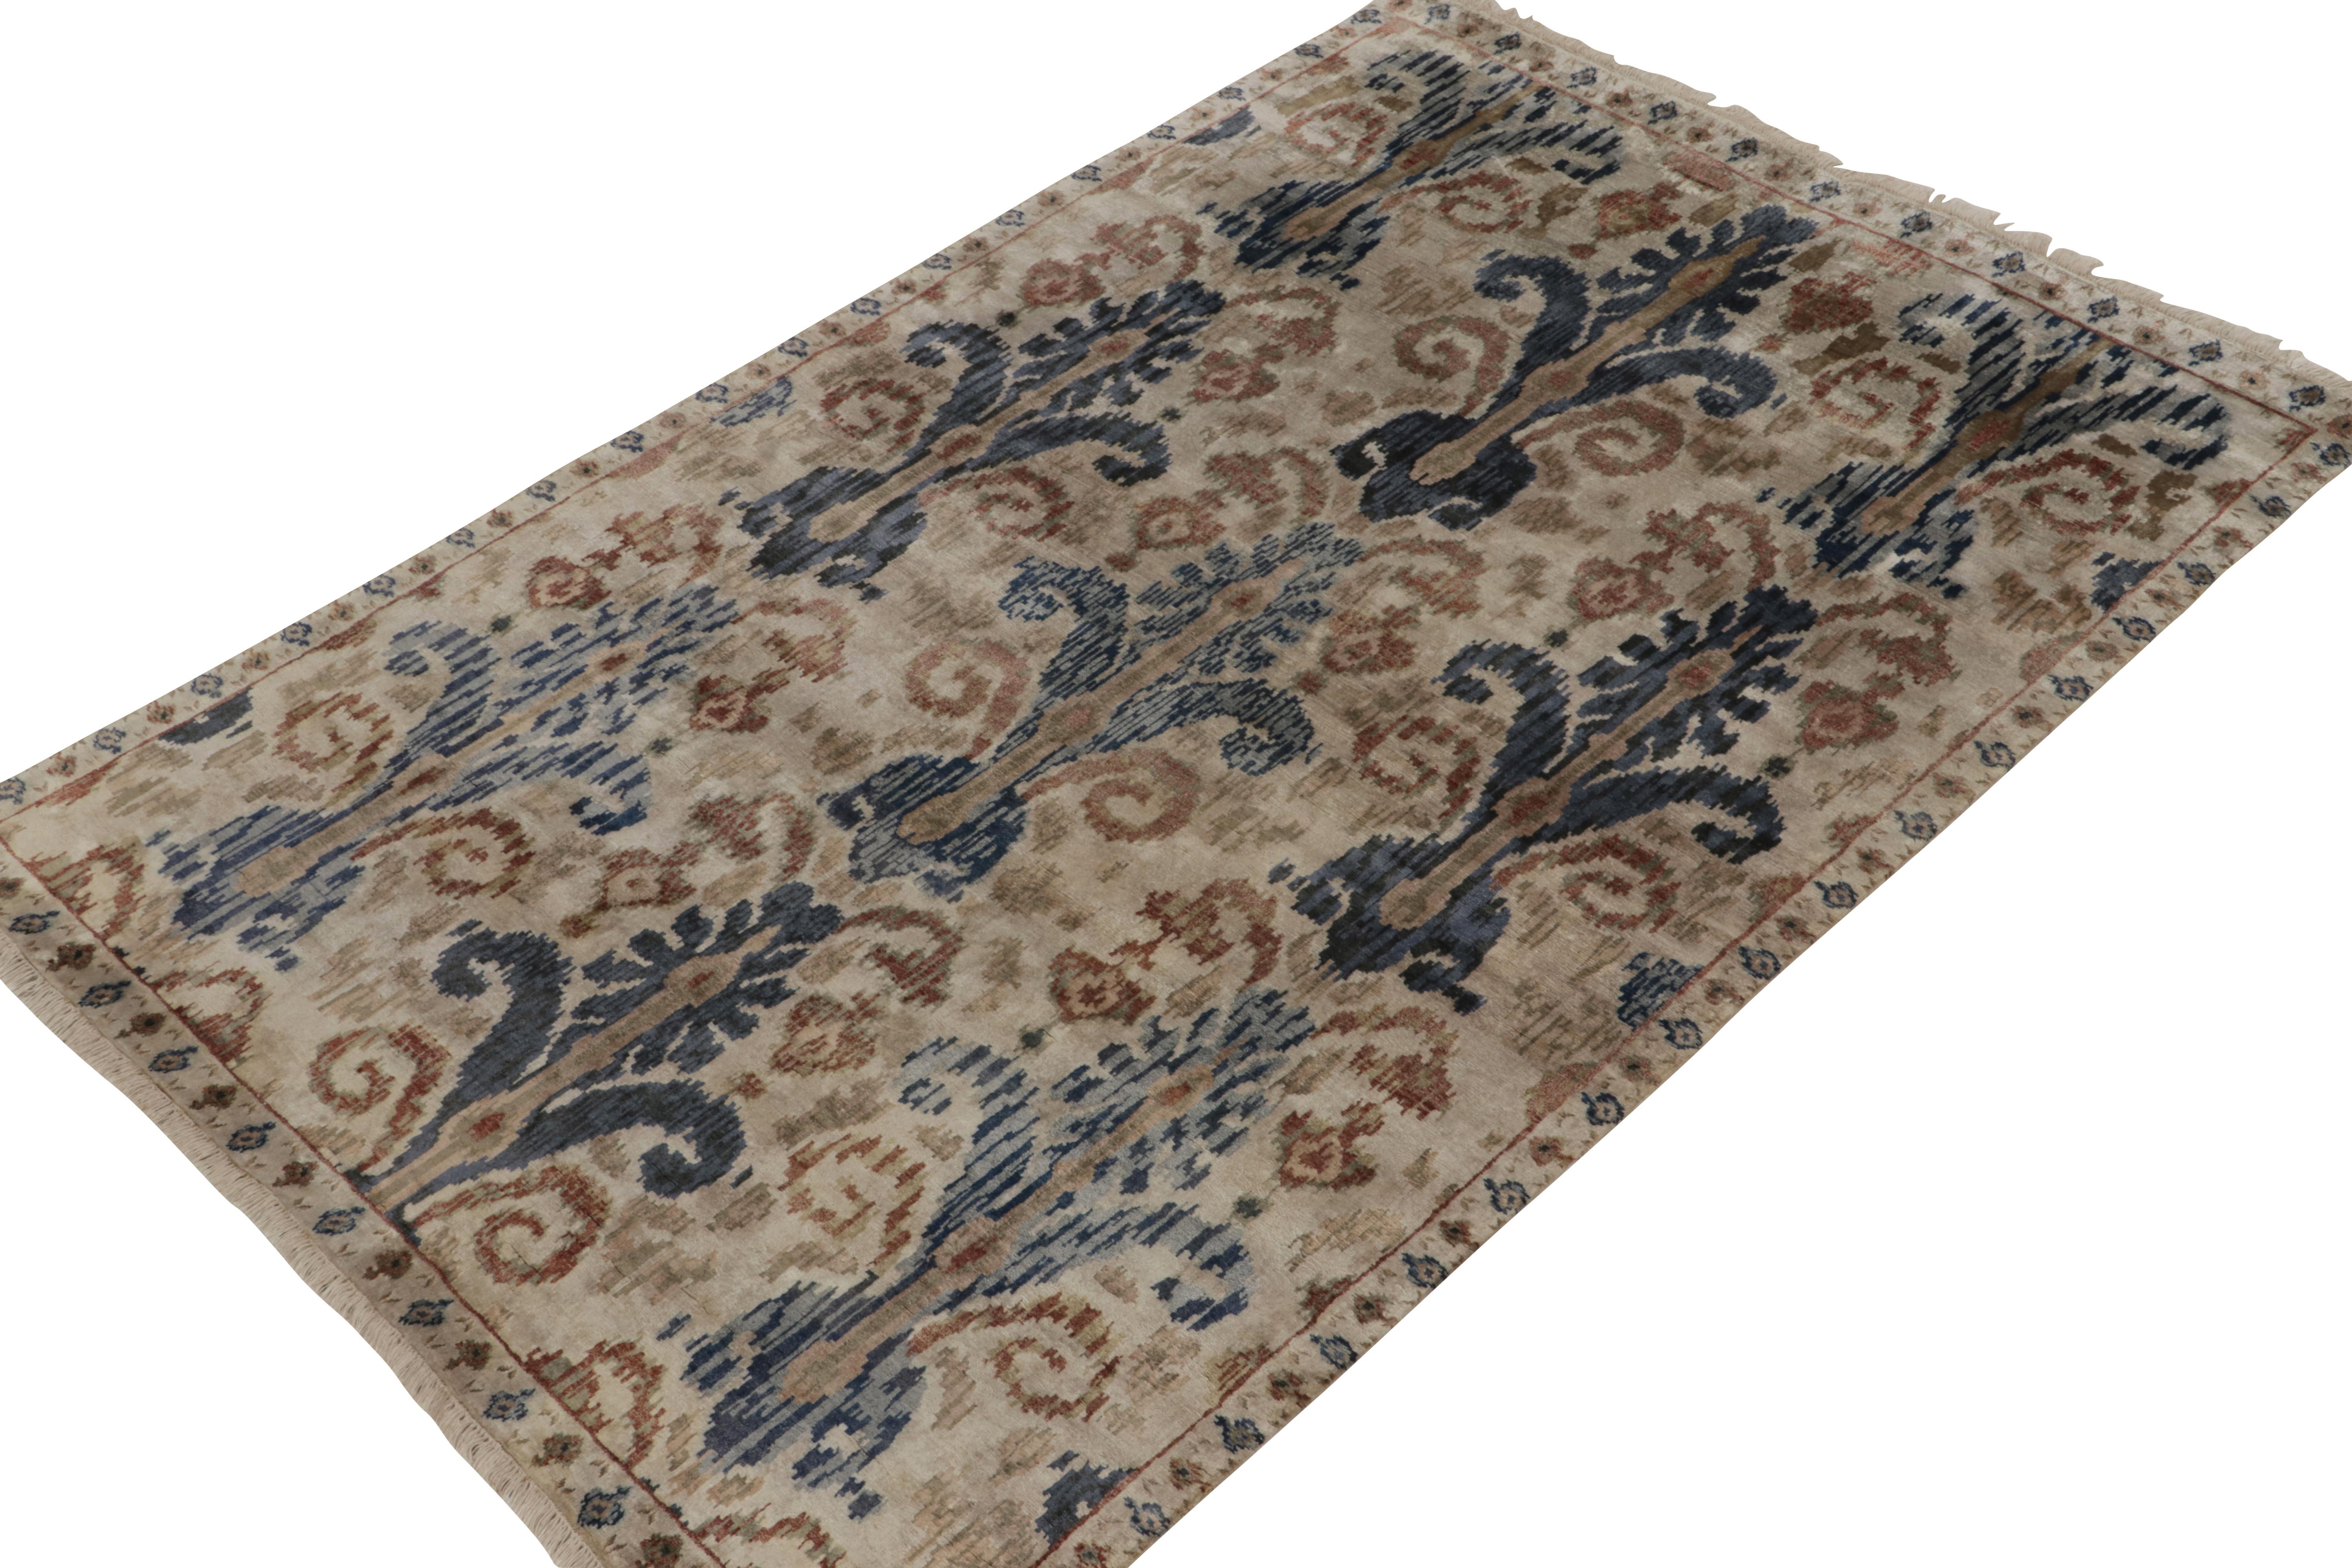 Hand-knotted in luxurious high-quality silk, this 6x9 from our Modern Classics collection is an ode to celebrated Ikats patterns. Rich blues and beige-browns enjoy fabulous movement in tandem with the silk’s natural luster on an elegant ivory